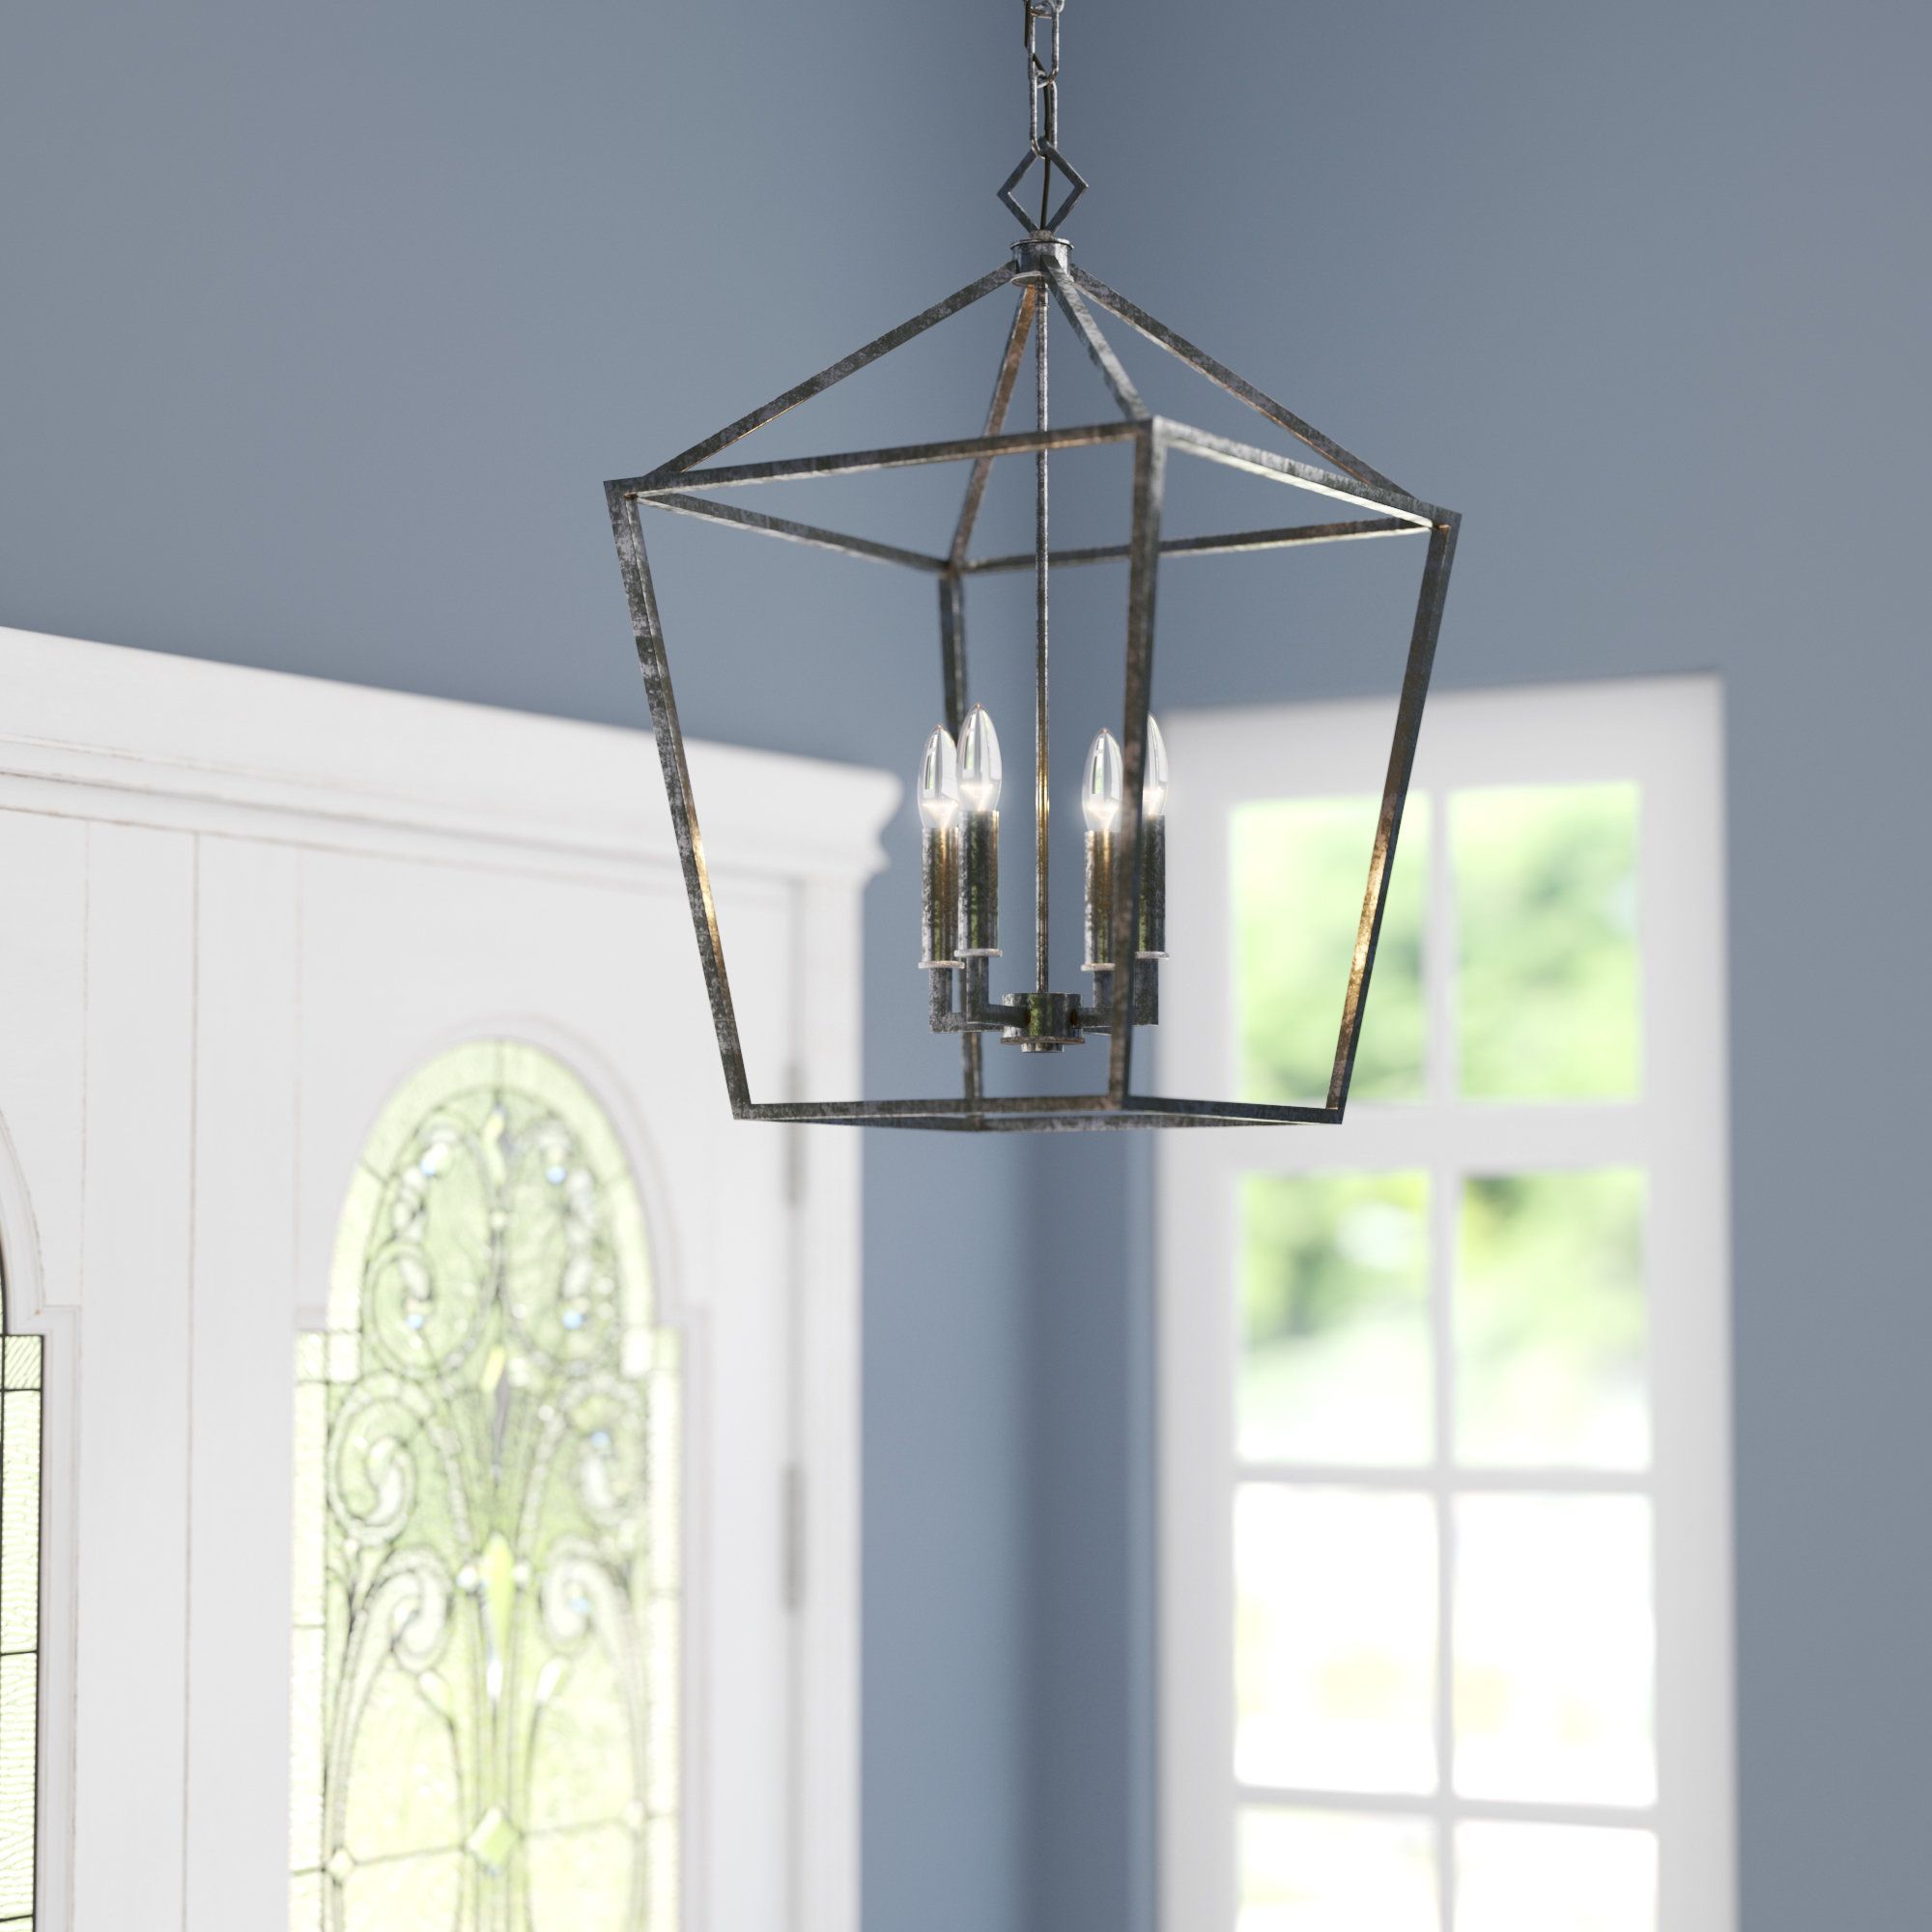 Varnum 4 Light Foyer Pendant | D E C O R I N S P O | Lantern With Thorne 4 Light Lantern Rectangle Pendants (View 24 of 30)